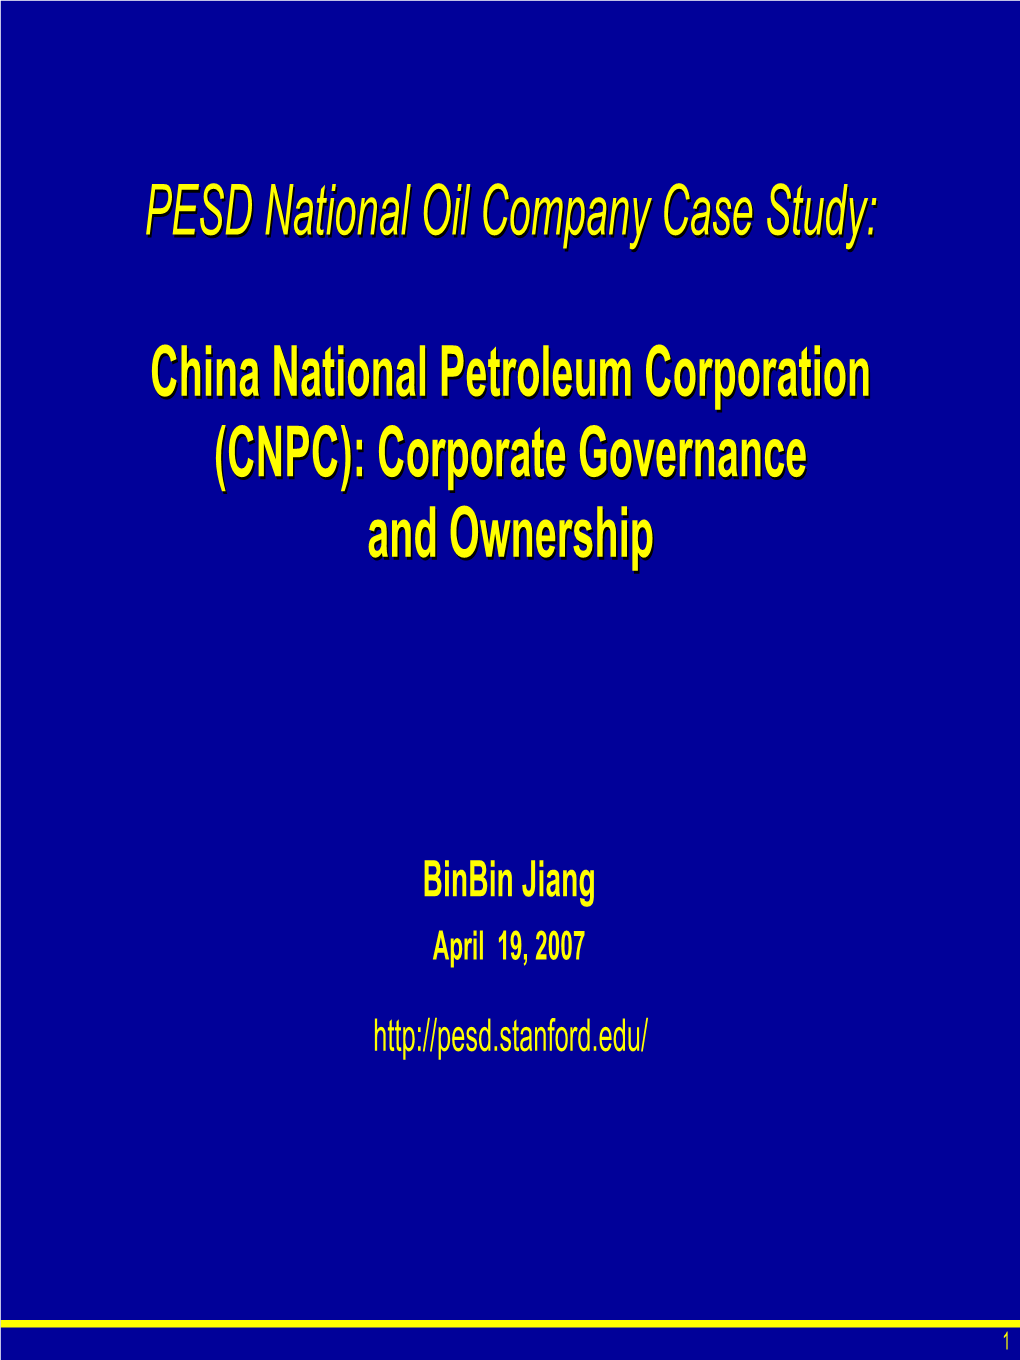 (CNPC): Corporate Governance and Ownership